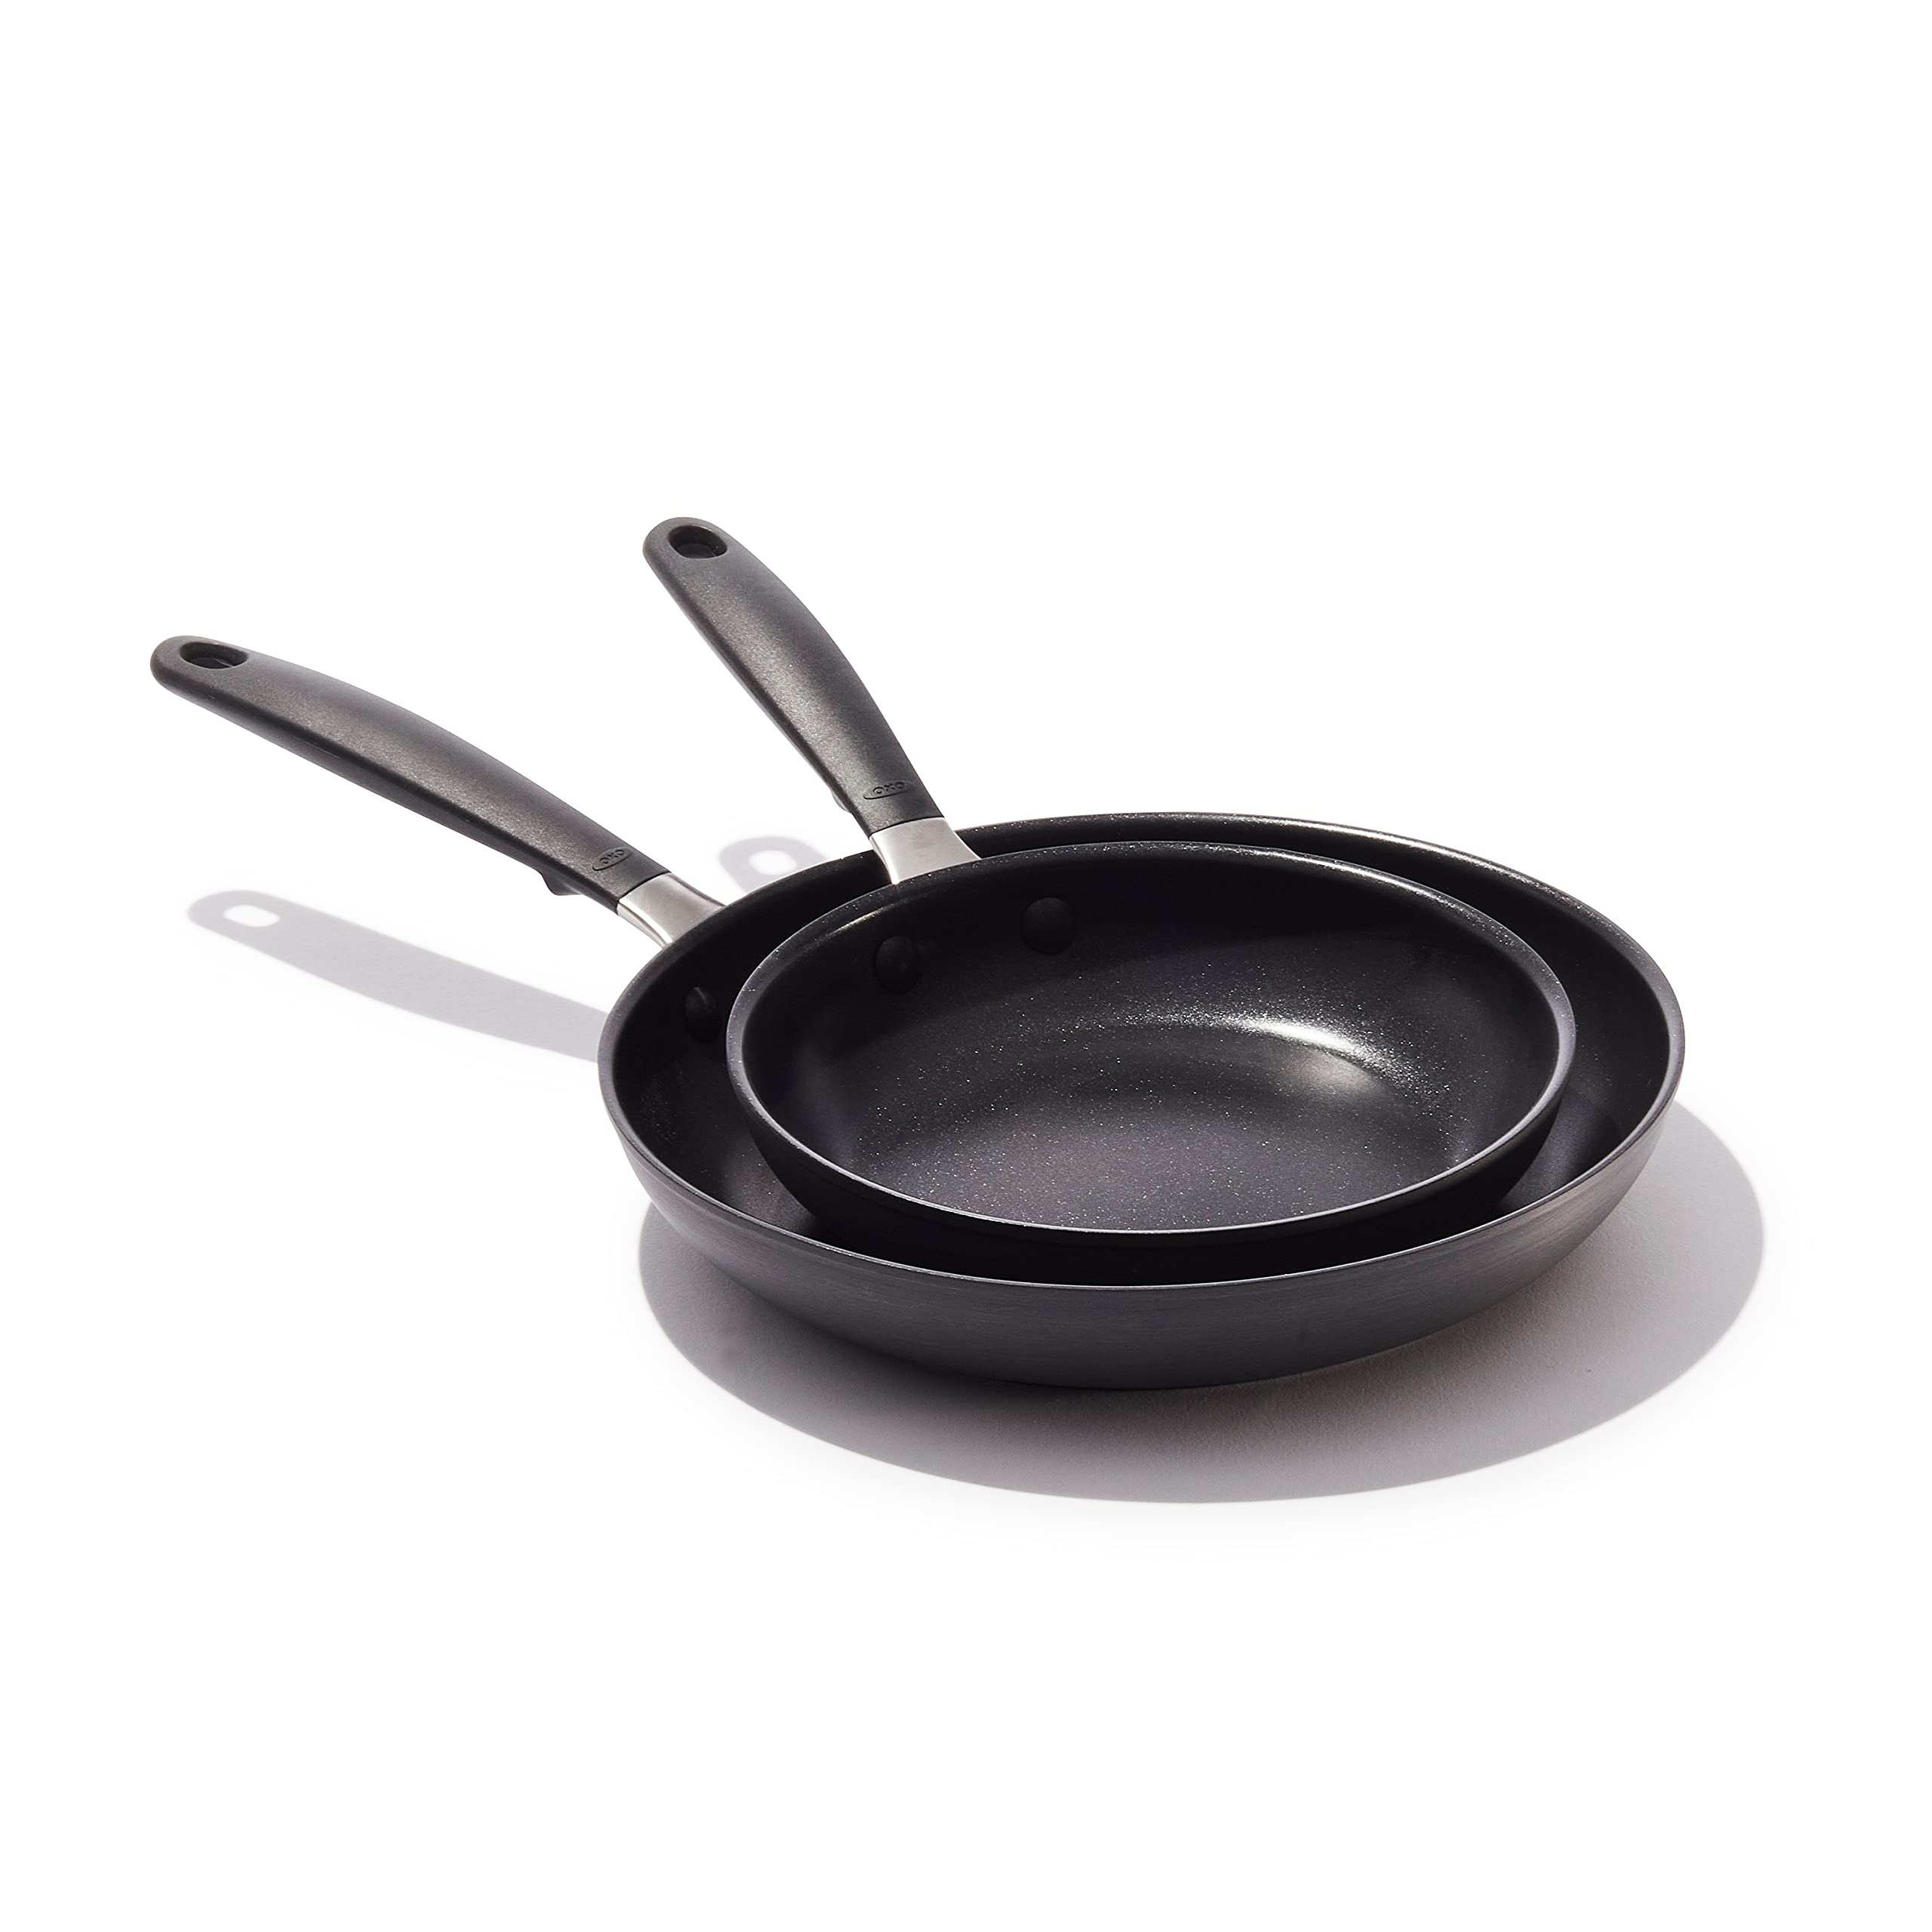 Prime Members: OXO Good Grips 8" and 10" Frying Pan Skillet Set, 3-Layered German Engineered Nonstick $33.82 + Free Ship